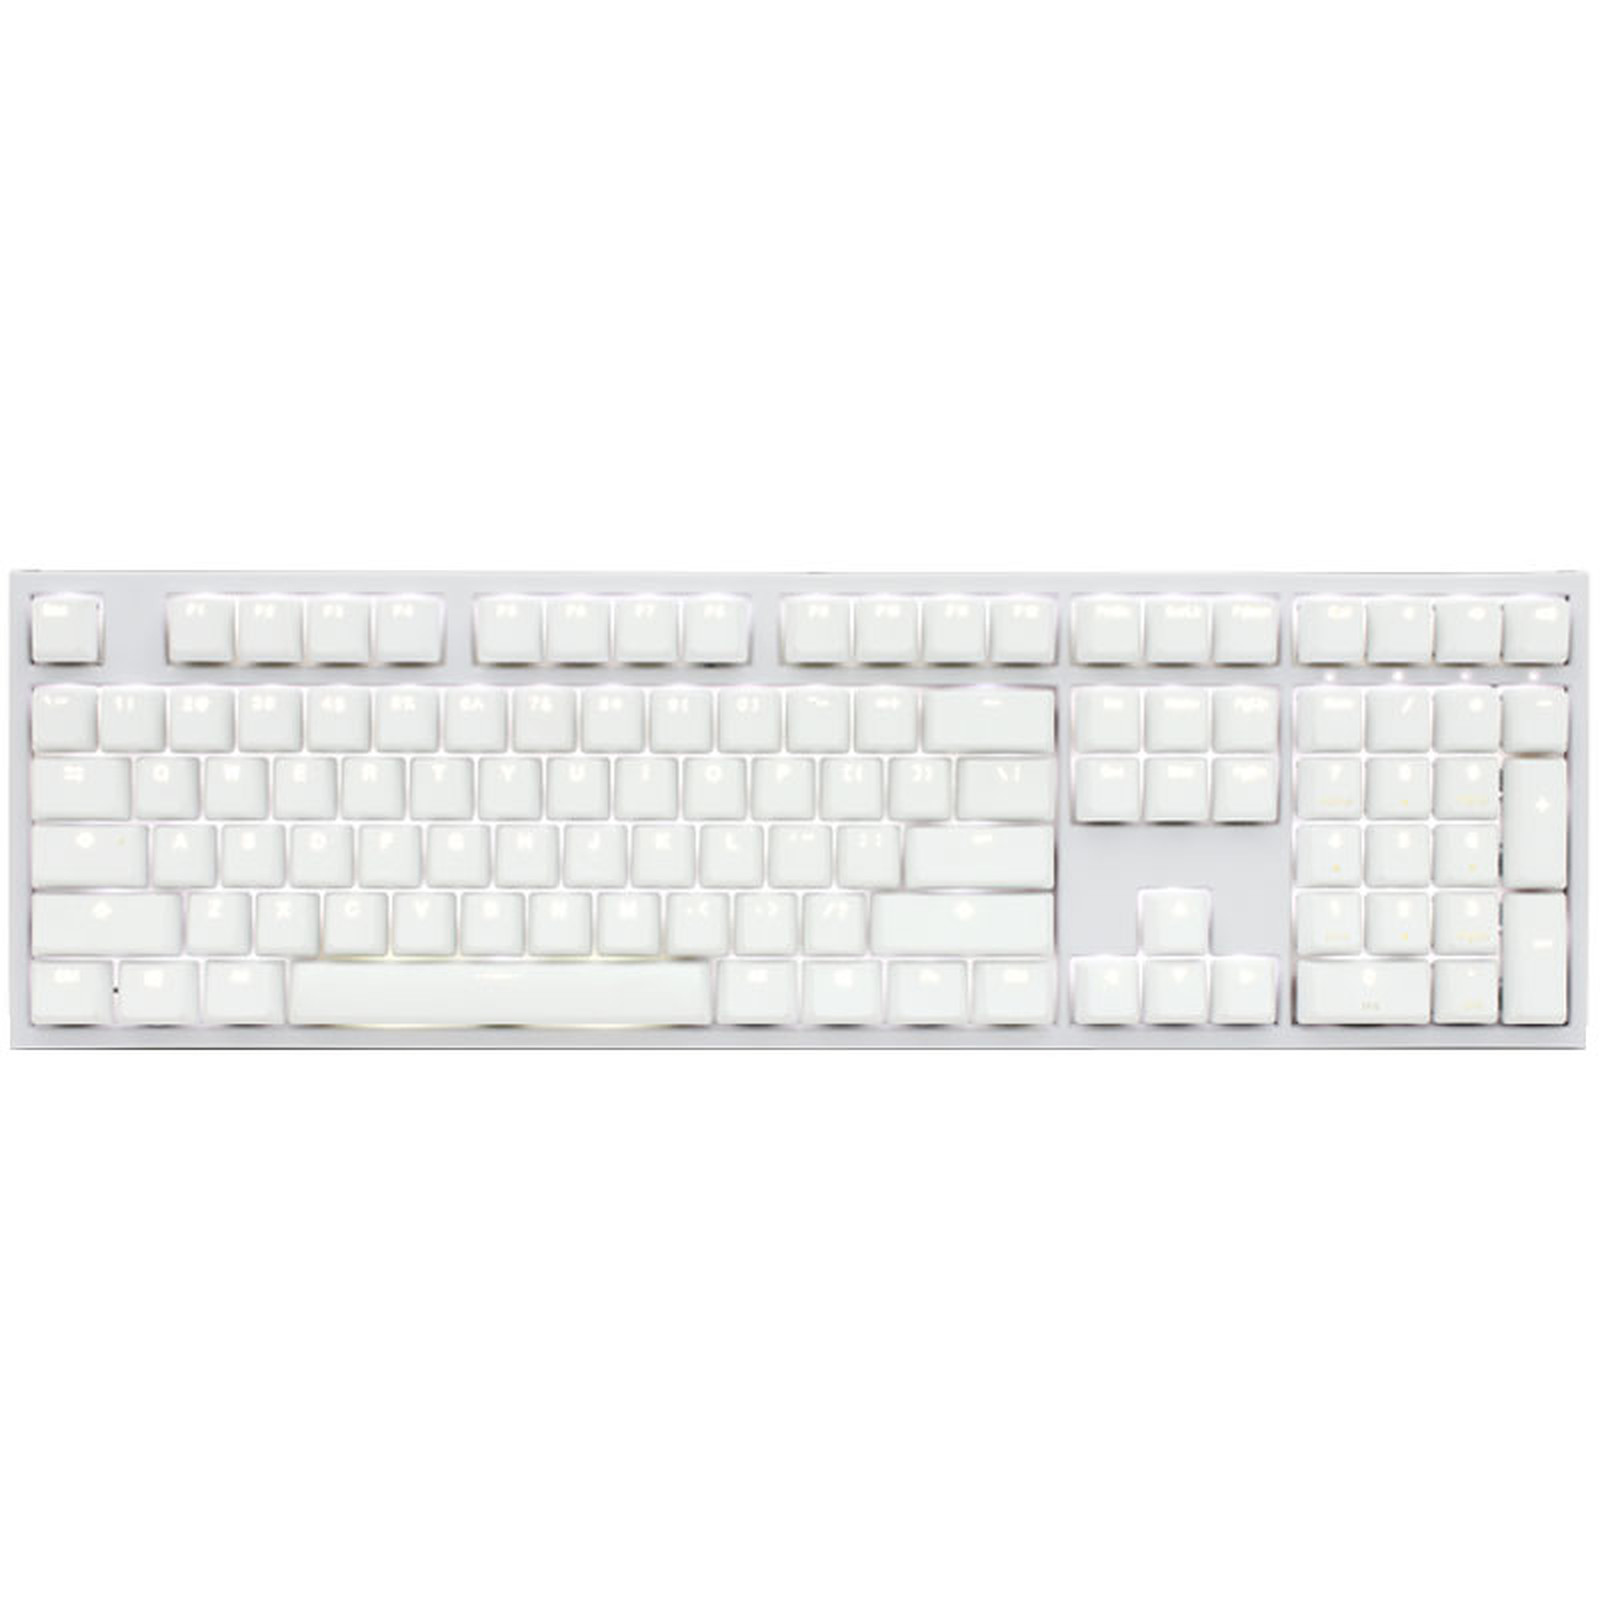 Ducky Channel One 2 Backlit (coloris blanc - Cherry MX Speed Silver - LEDs blanches) - Clavier PC Ducky Channel